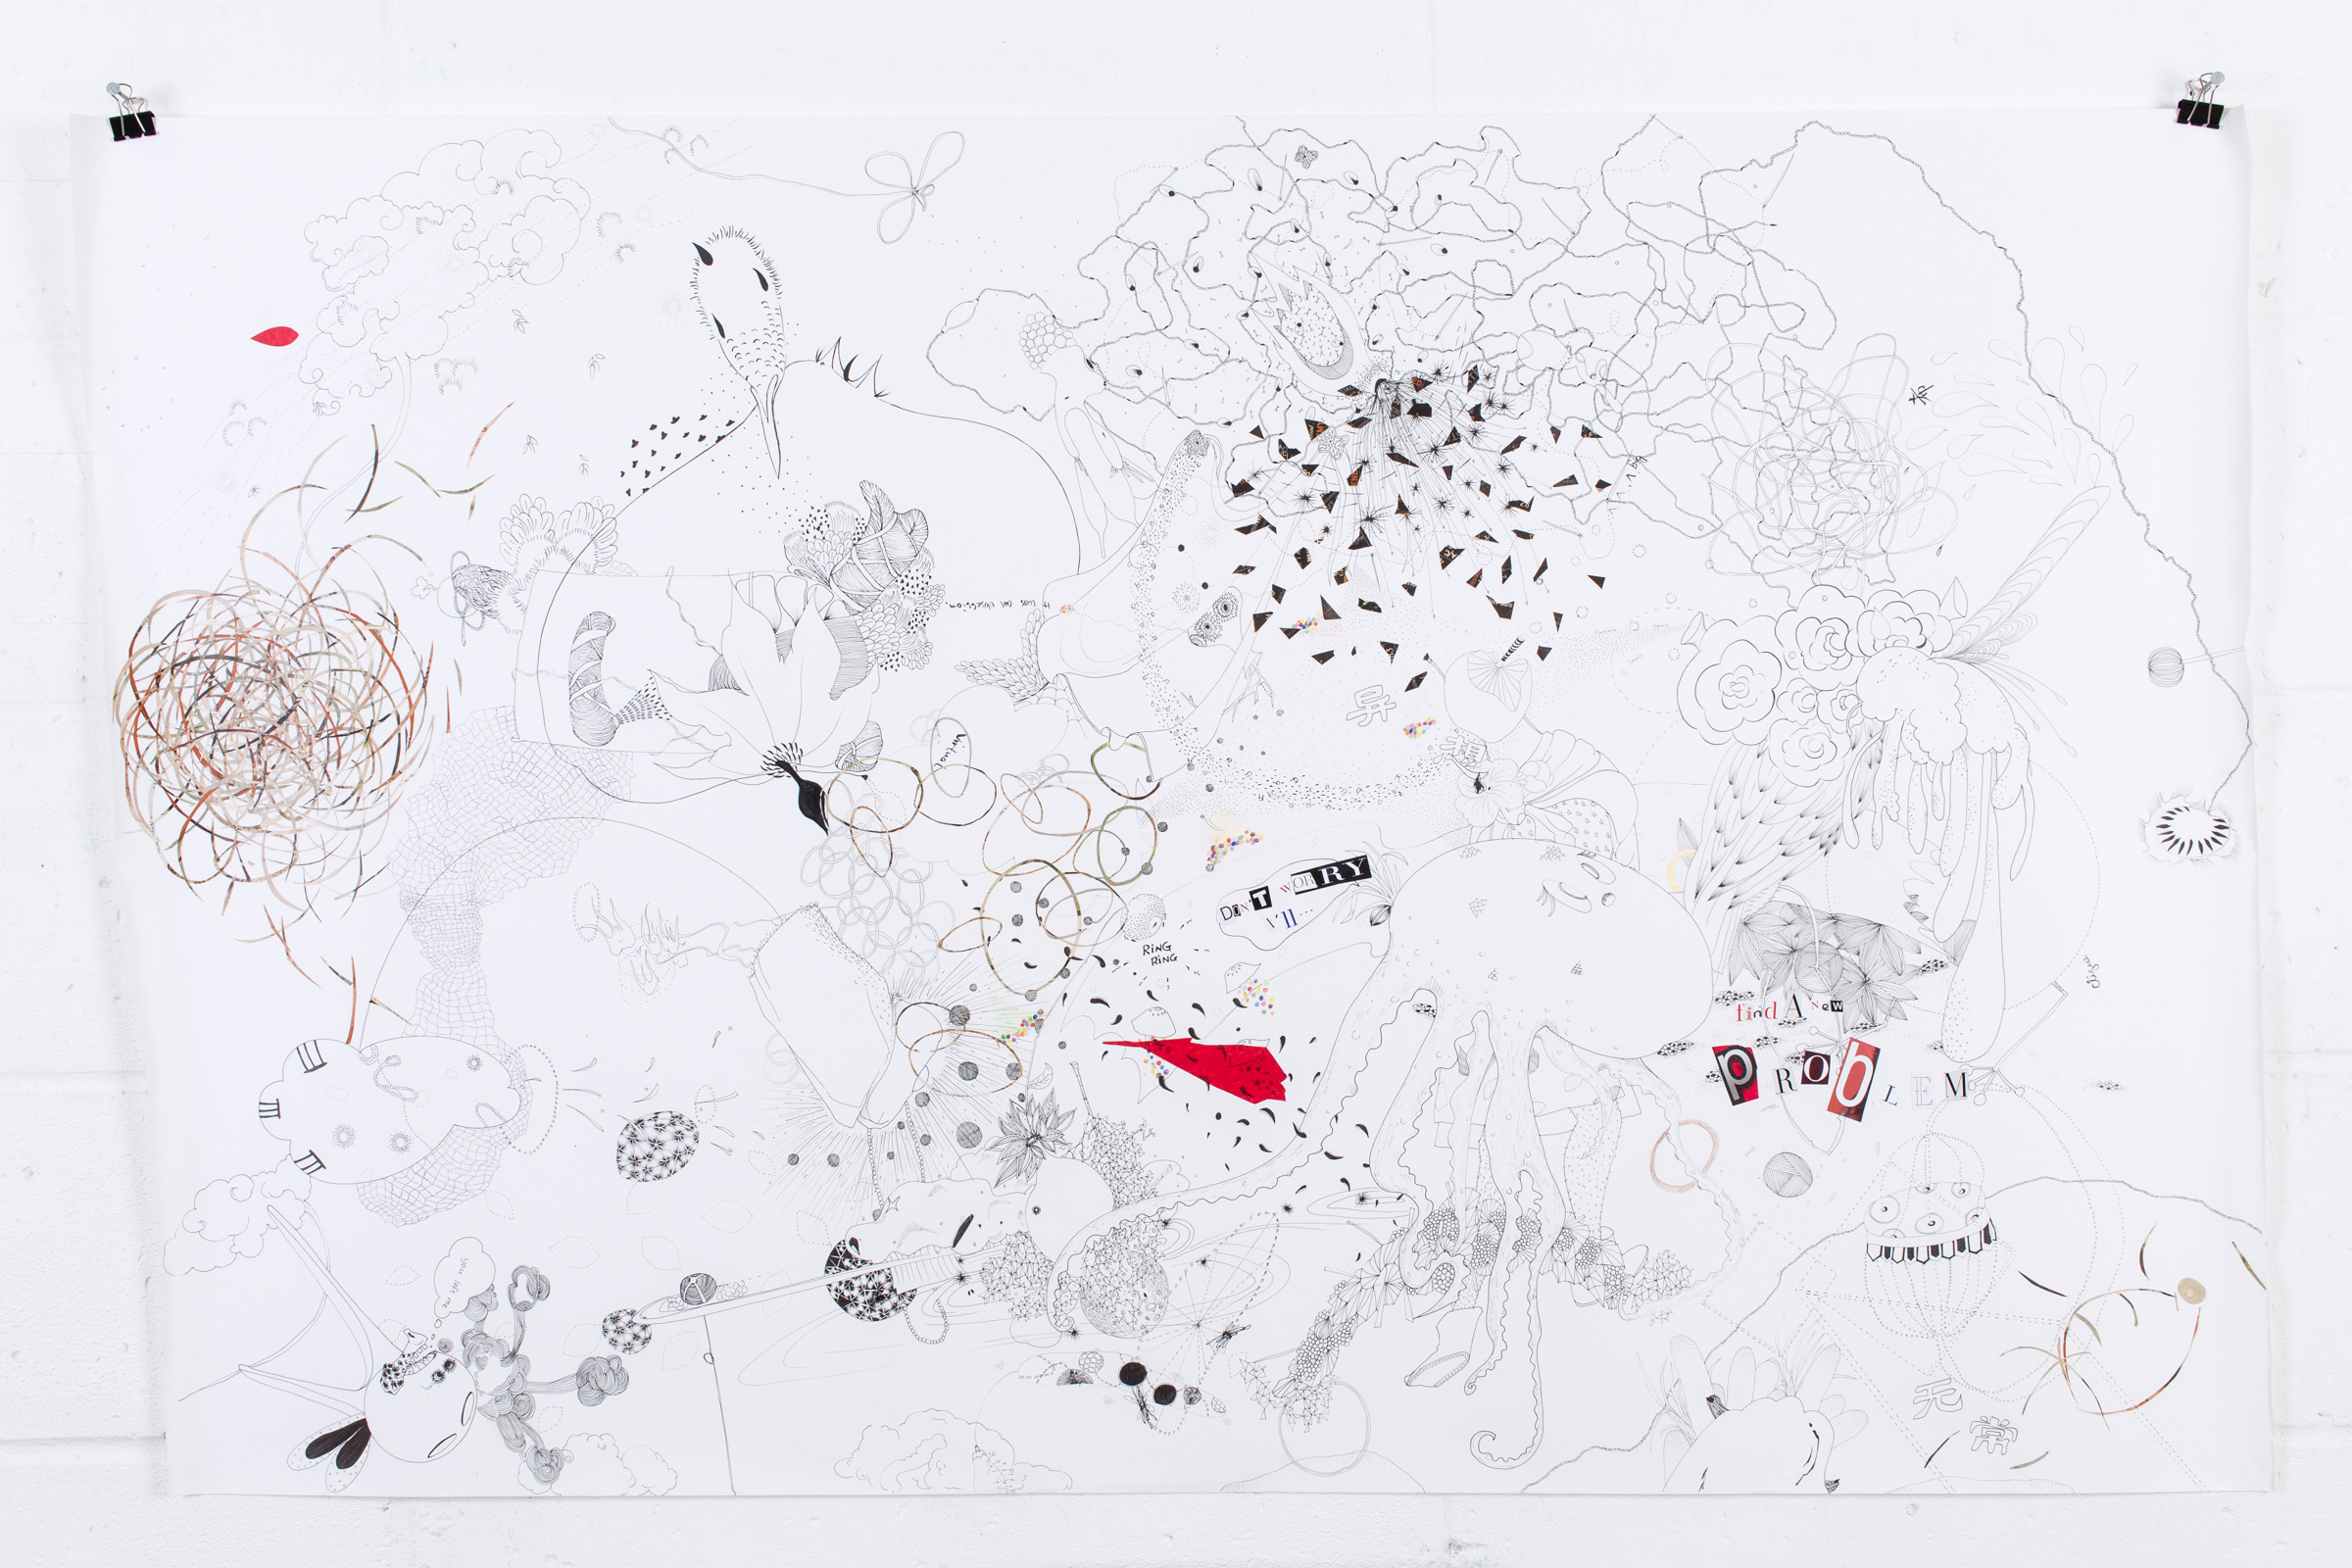 Ink and collage on paper, 84 x 135 cm